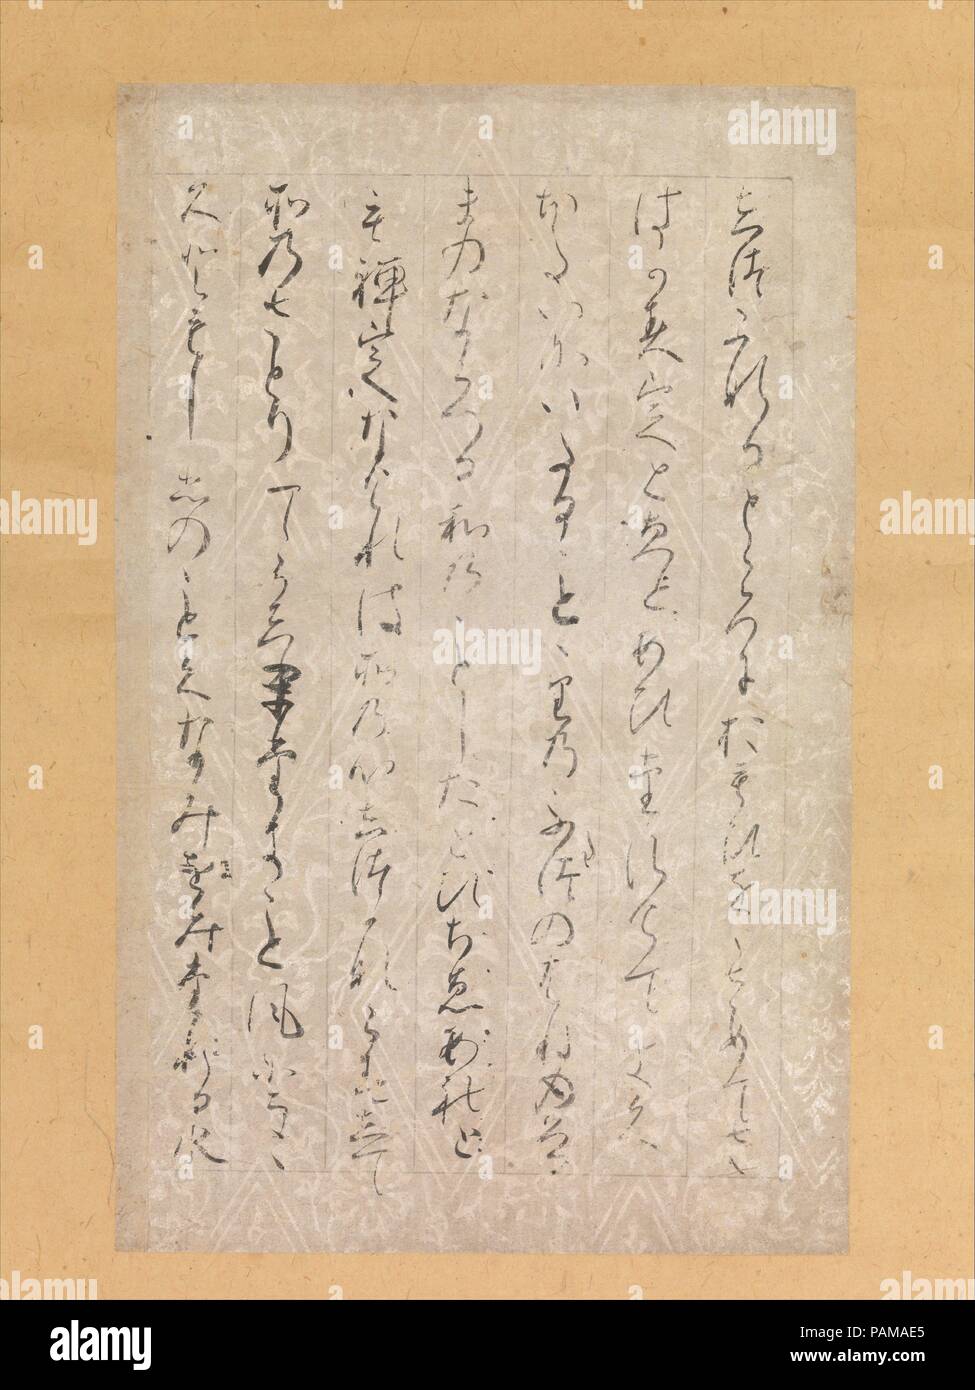 Page from Illustrations and Explanations of the Three Jewels (Sanbo e-kotoba), one of the 'Todaiji Fragments' (Todaiji-gire). Artist: Calligraphy attributed to Minamoto no Toshiyori (Japanese, 1055-1129). Culture: Japan. Dimensions: Image: 9 1/4 × 5 7/8 in. (23.5 × 15 cm)  Overall with mounting: 49 3/16 × 13 3/8 in. (125 × 34 cm)  Overall with knobs: 49 3/16 × 15 3/8 in. (125 × 39 cm). Date: 1120.  Illustrations and Explanations of the Three Jewels was originally compiled in 984 by the courtier-poet Minamoto no Tamenori as an introductory guide to Buddhism. The 'Three Jewels' of Buddhism compr Stock Photo